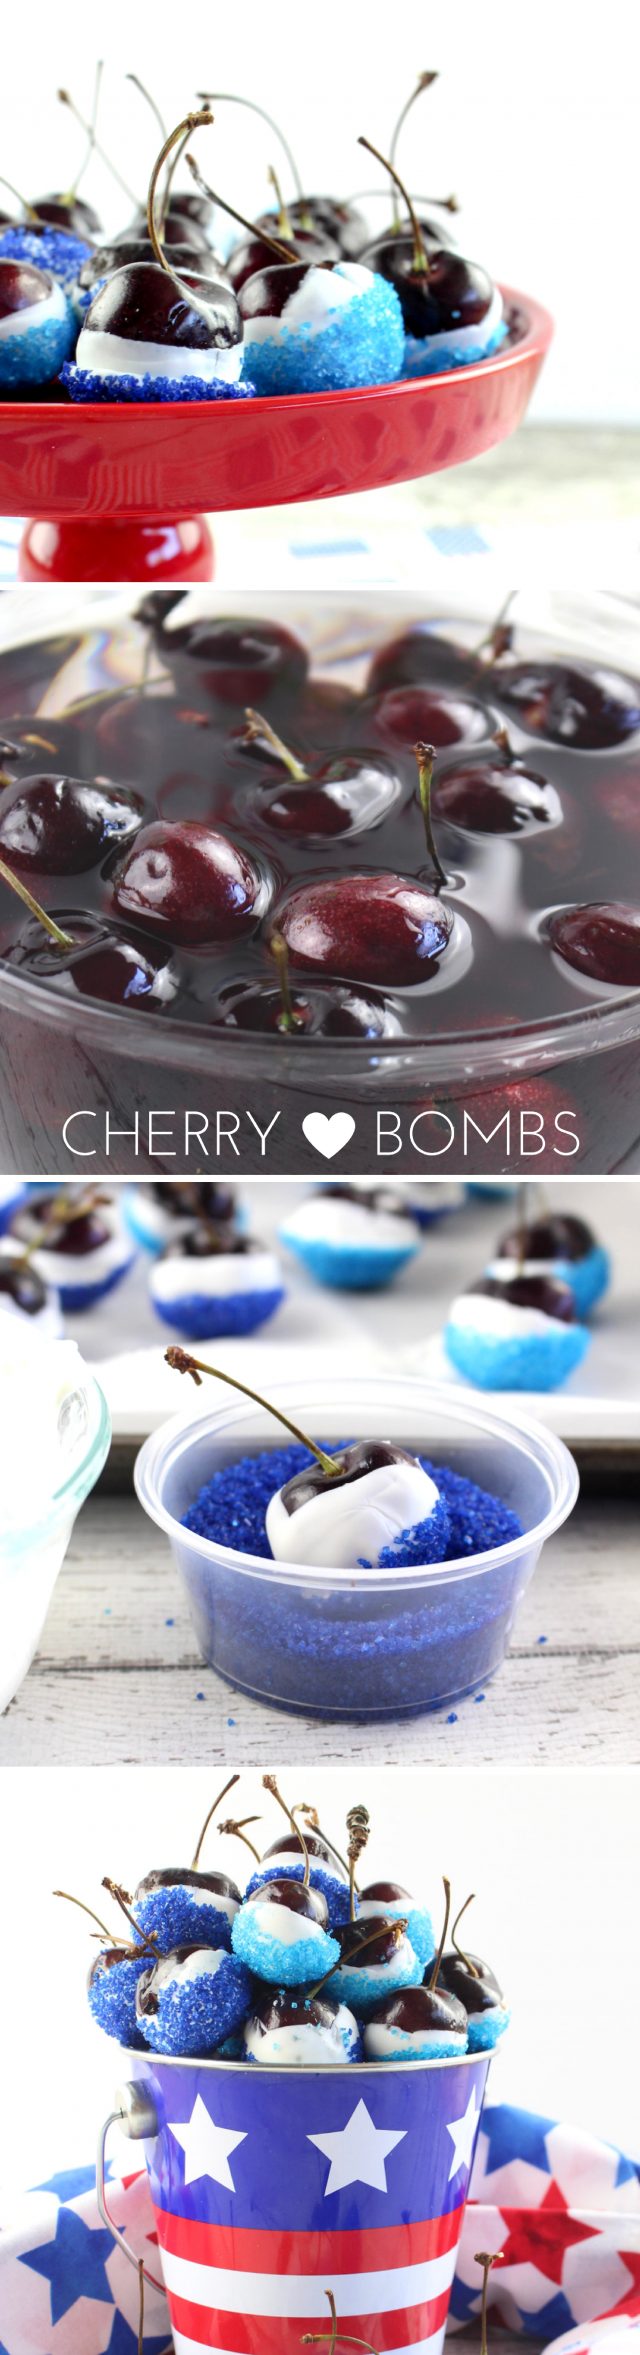 Red, White & Blue Boozy Cherry Bombs Recipe for July 4th